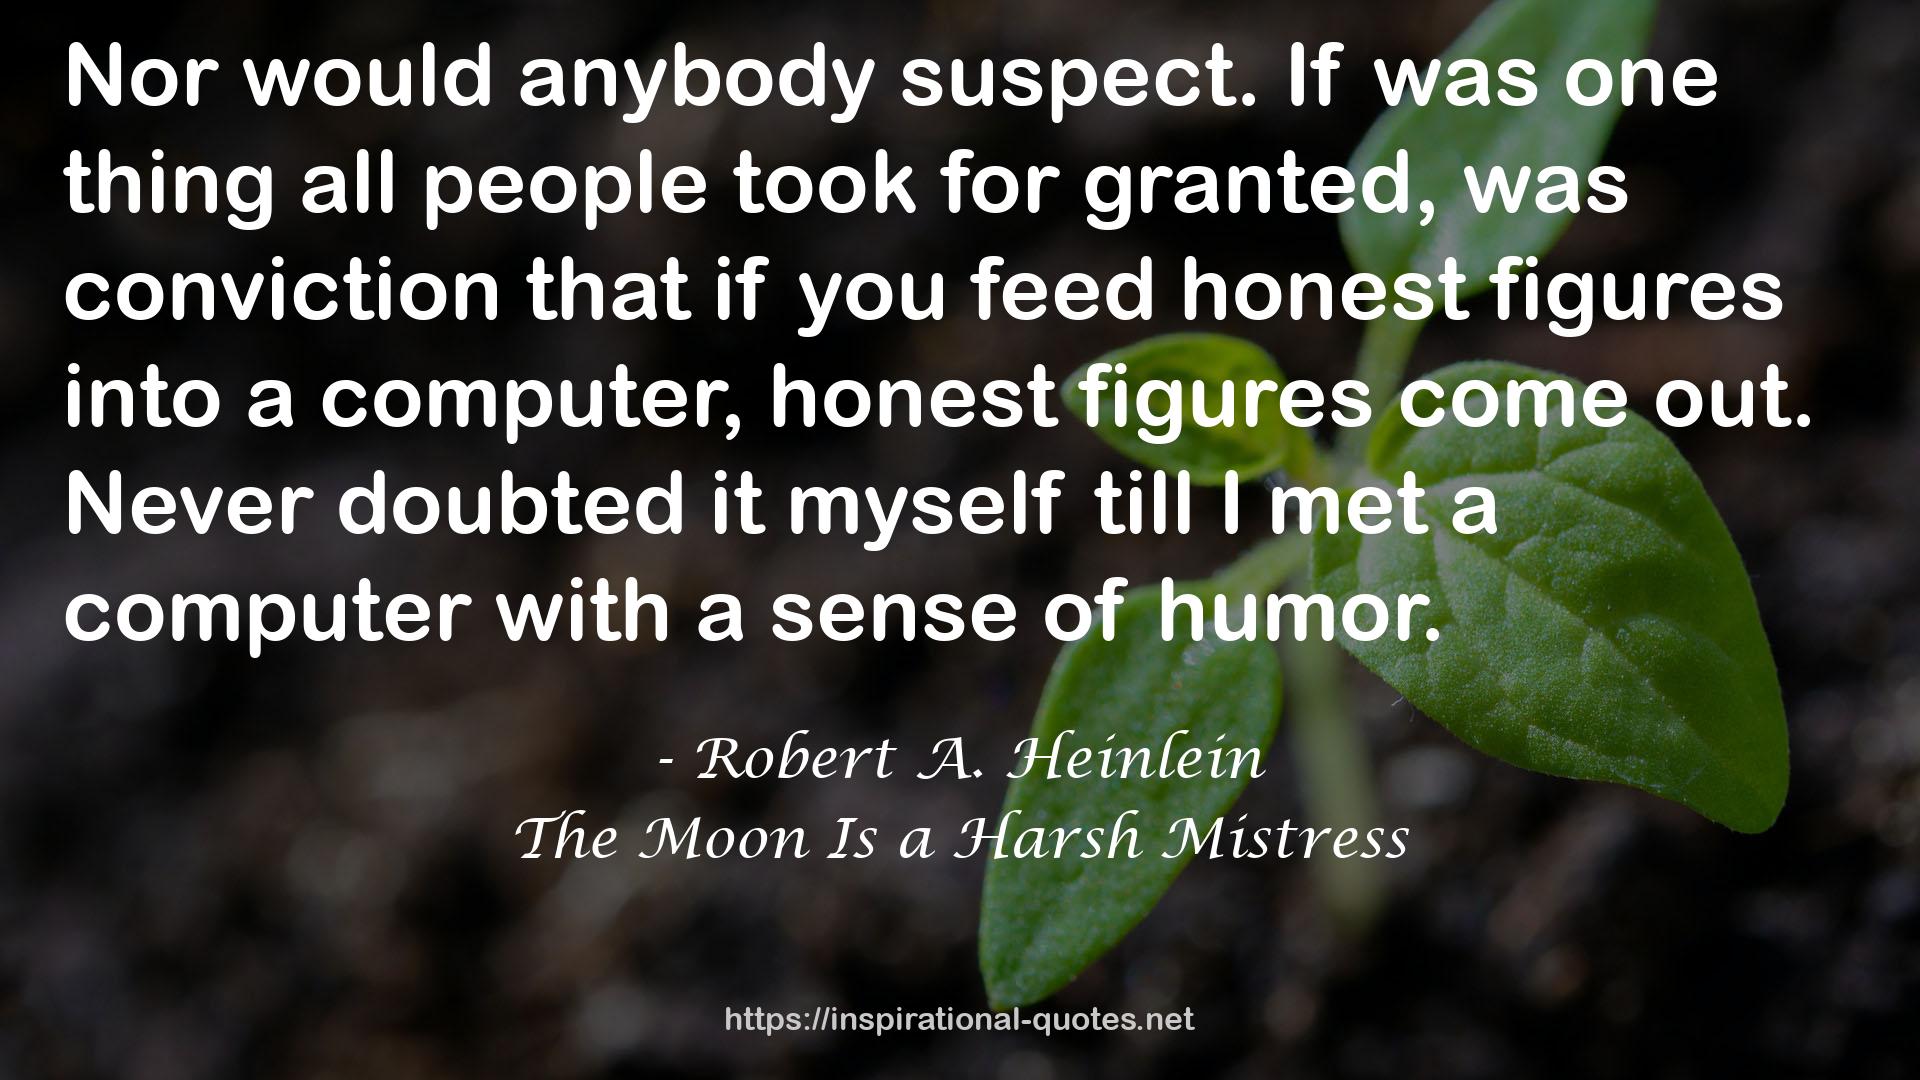 The Moon Is a Harsh Mistress QUOTES